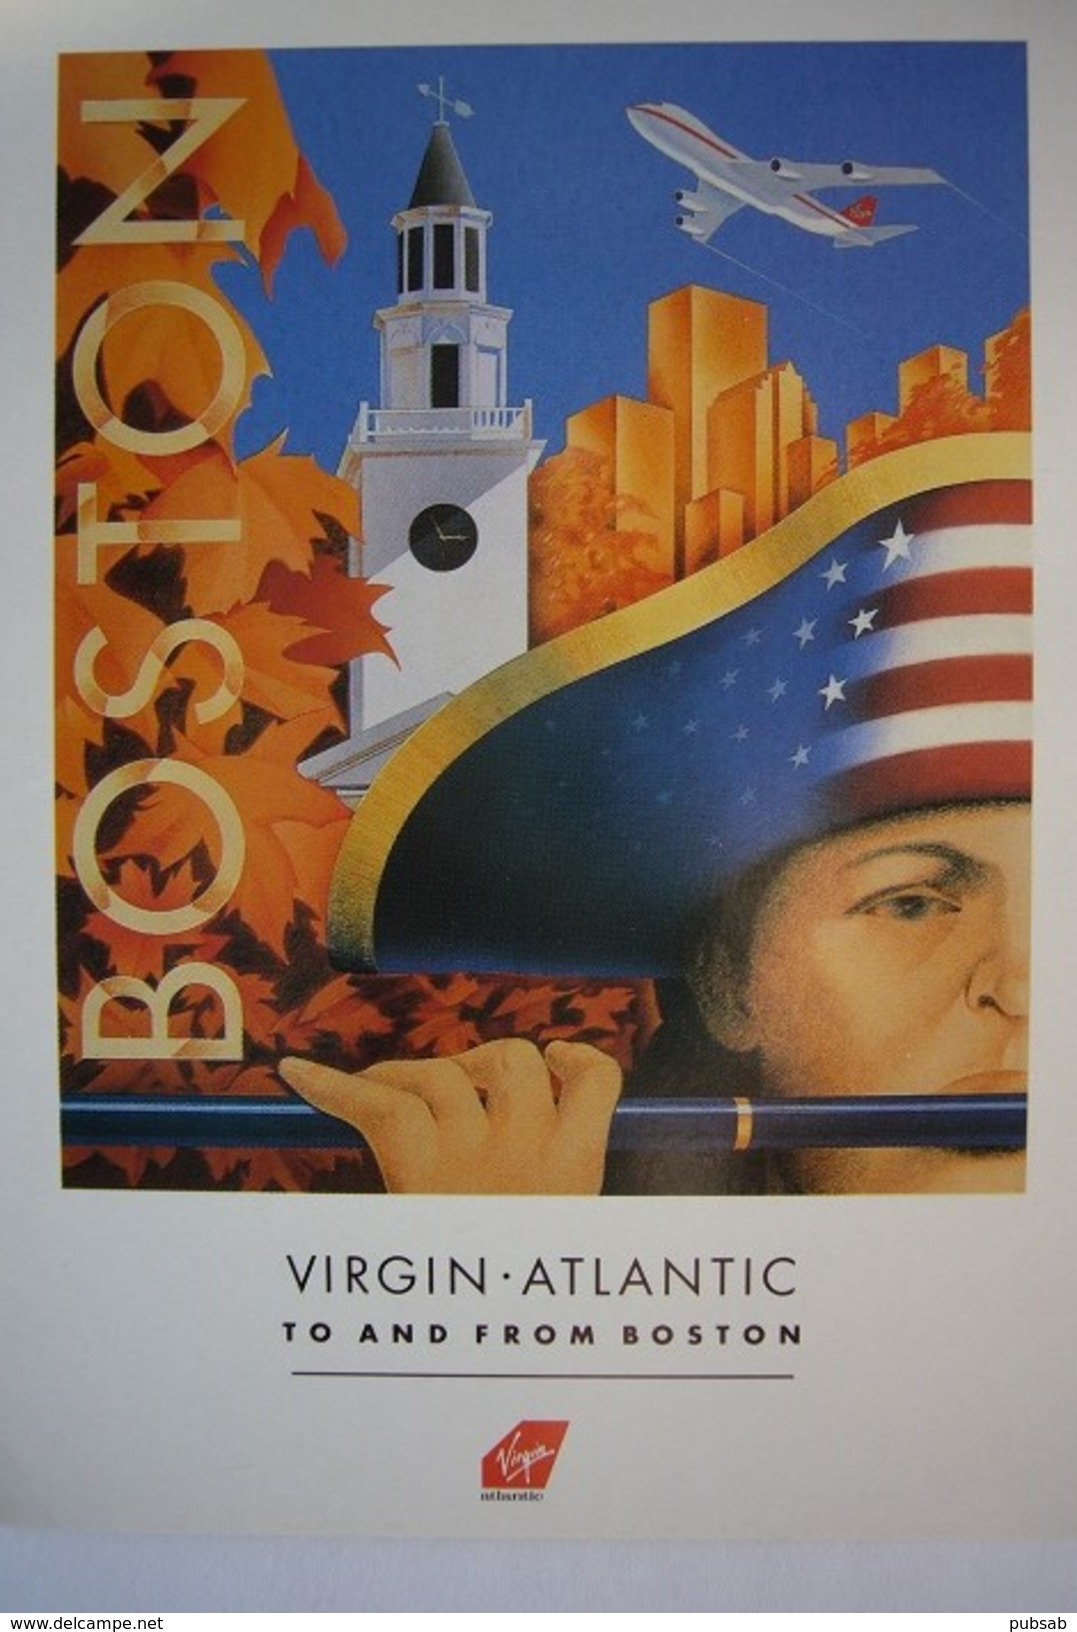 Avion / Airplane / Virgin Atlantic / To And From Boston / Advertising Card / Airline Issue - 1946-....: Moderne